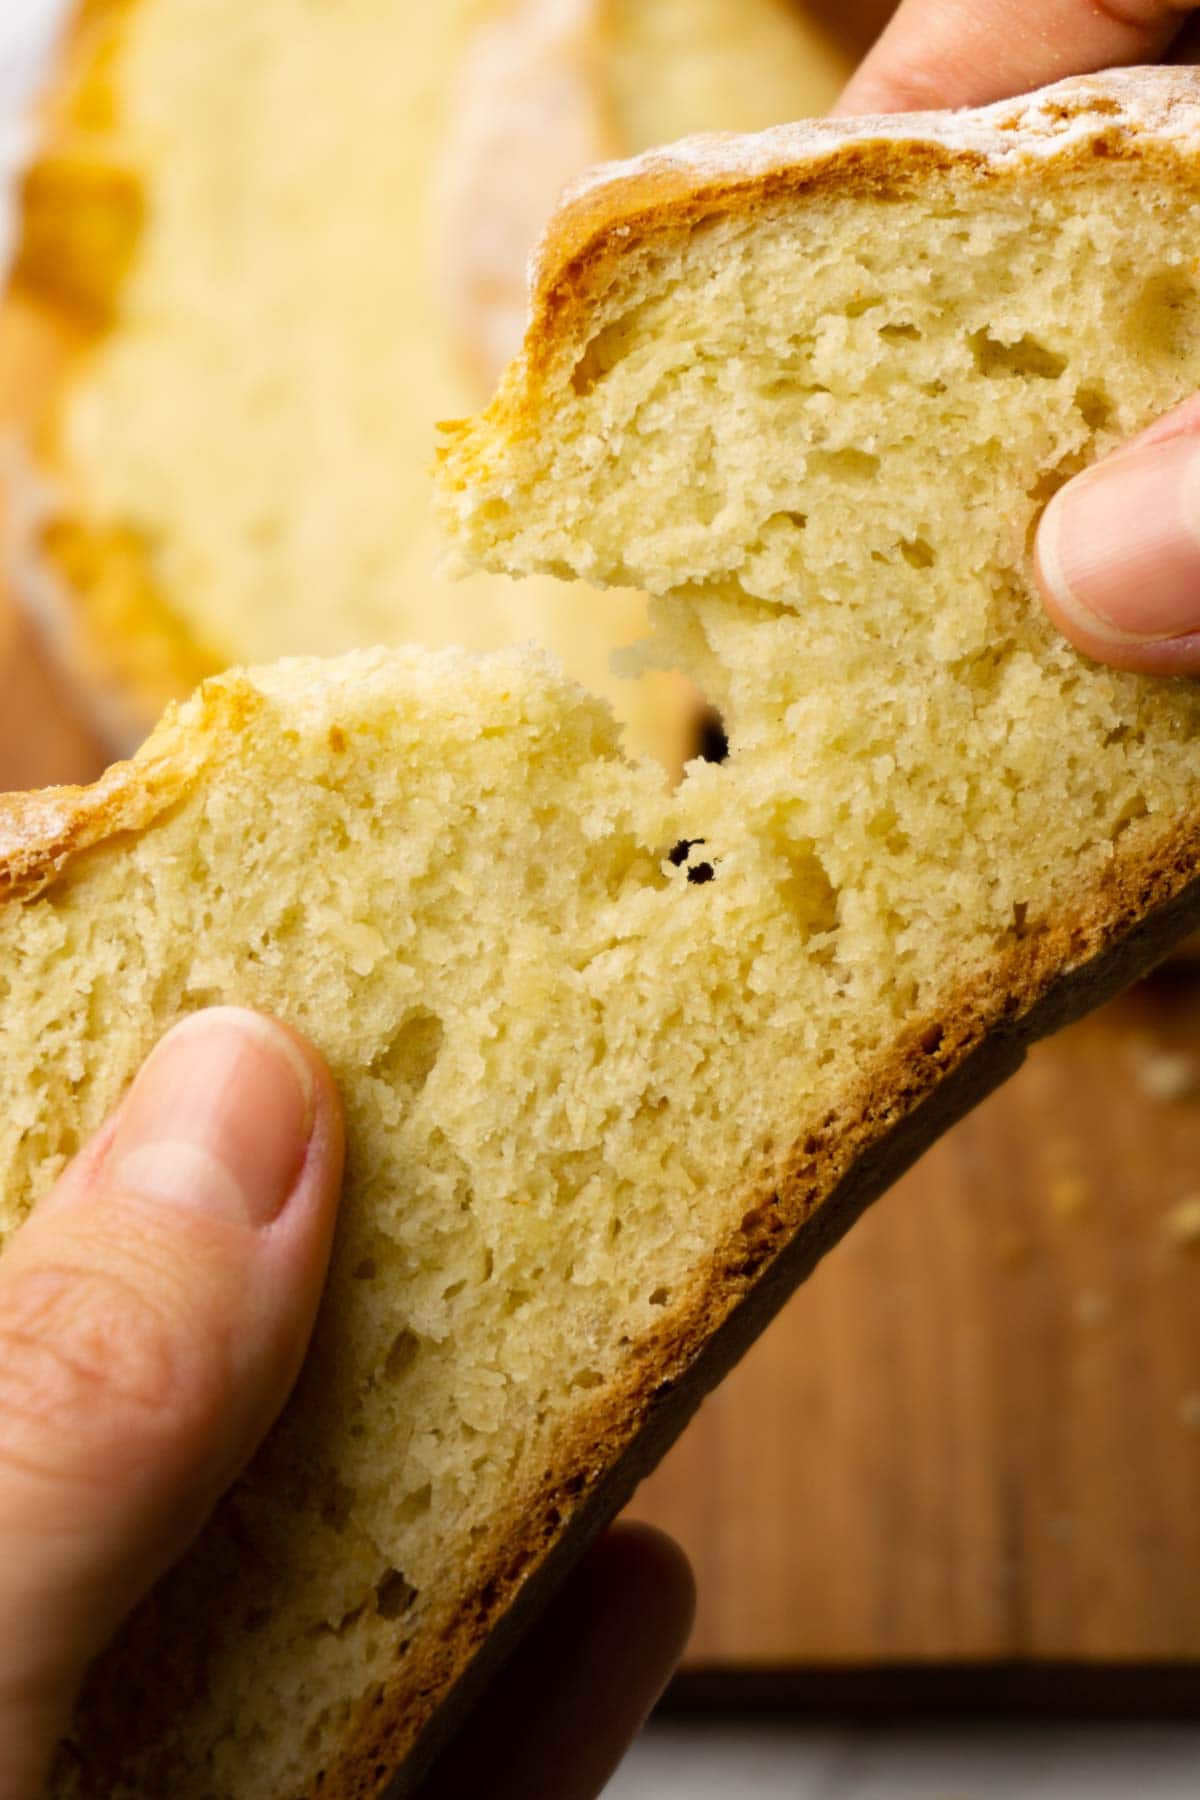 Hands ripping apart a slice of soda bread.